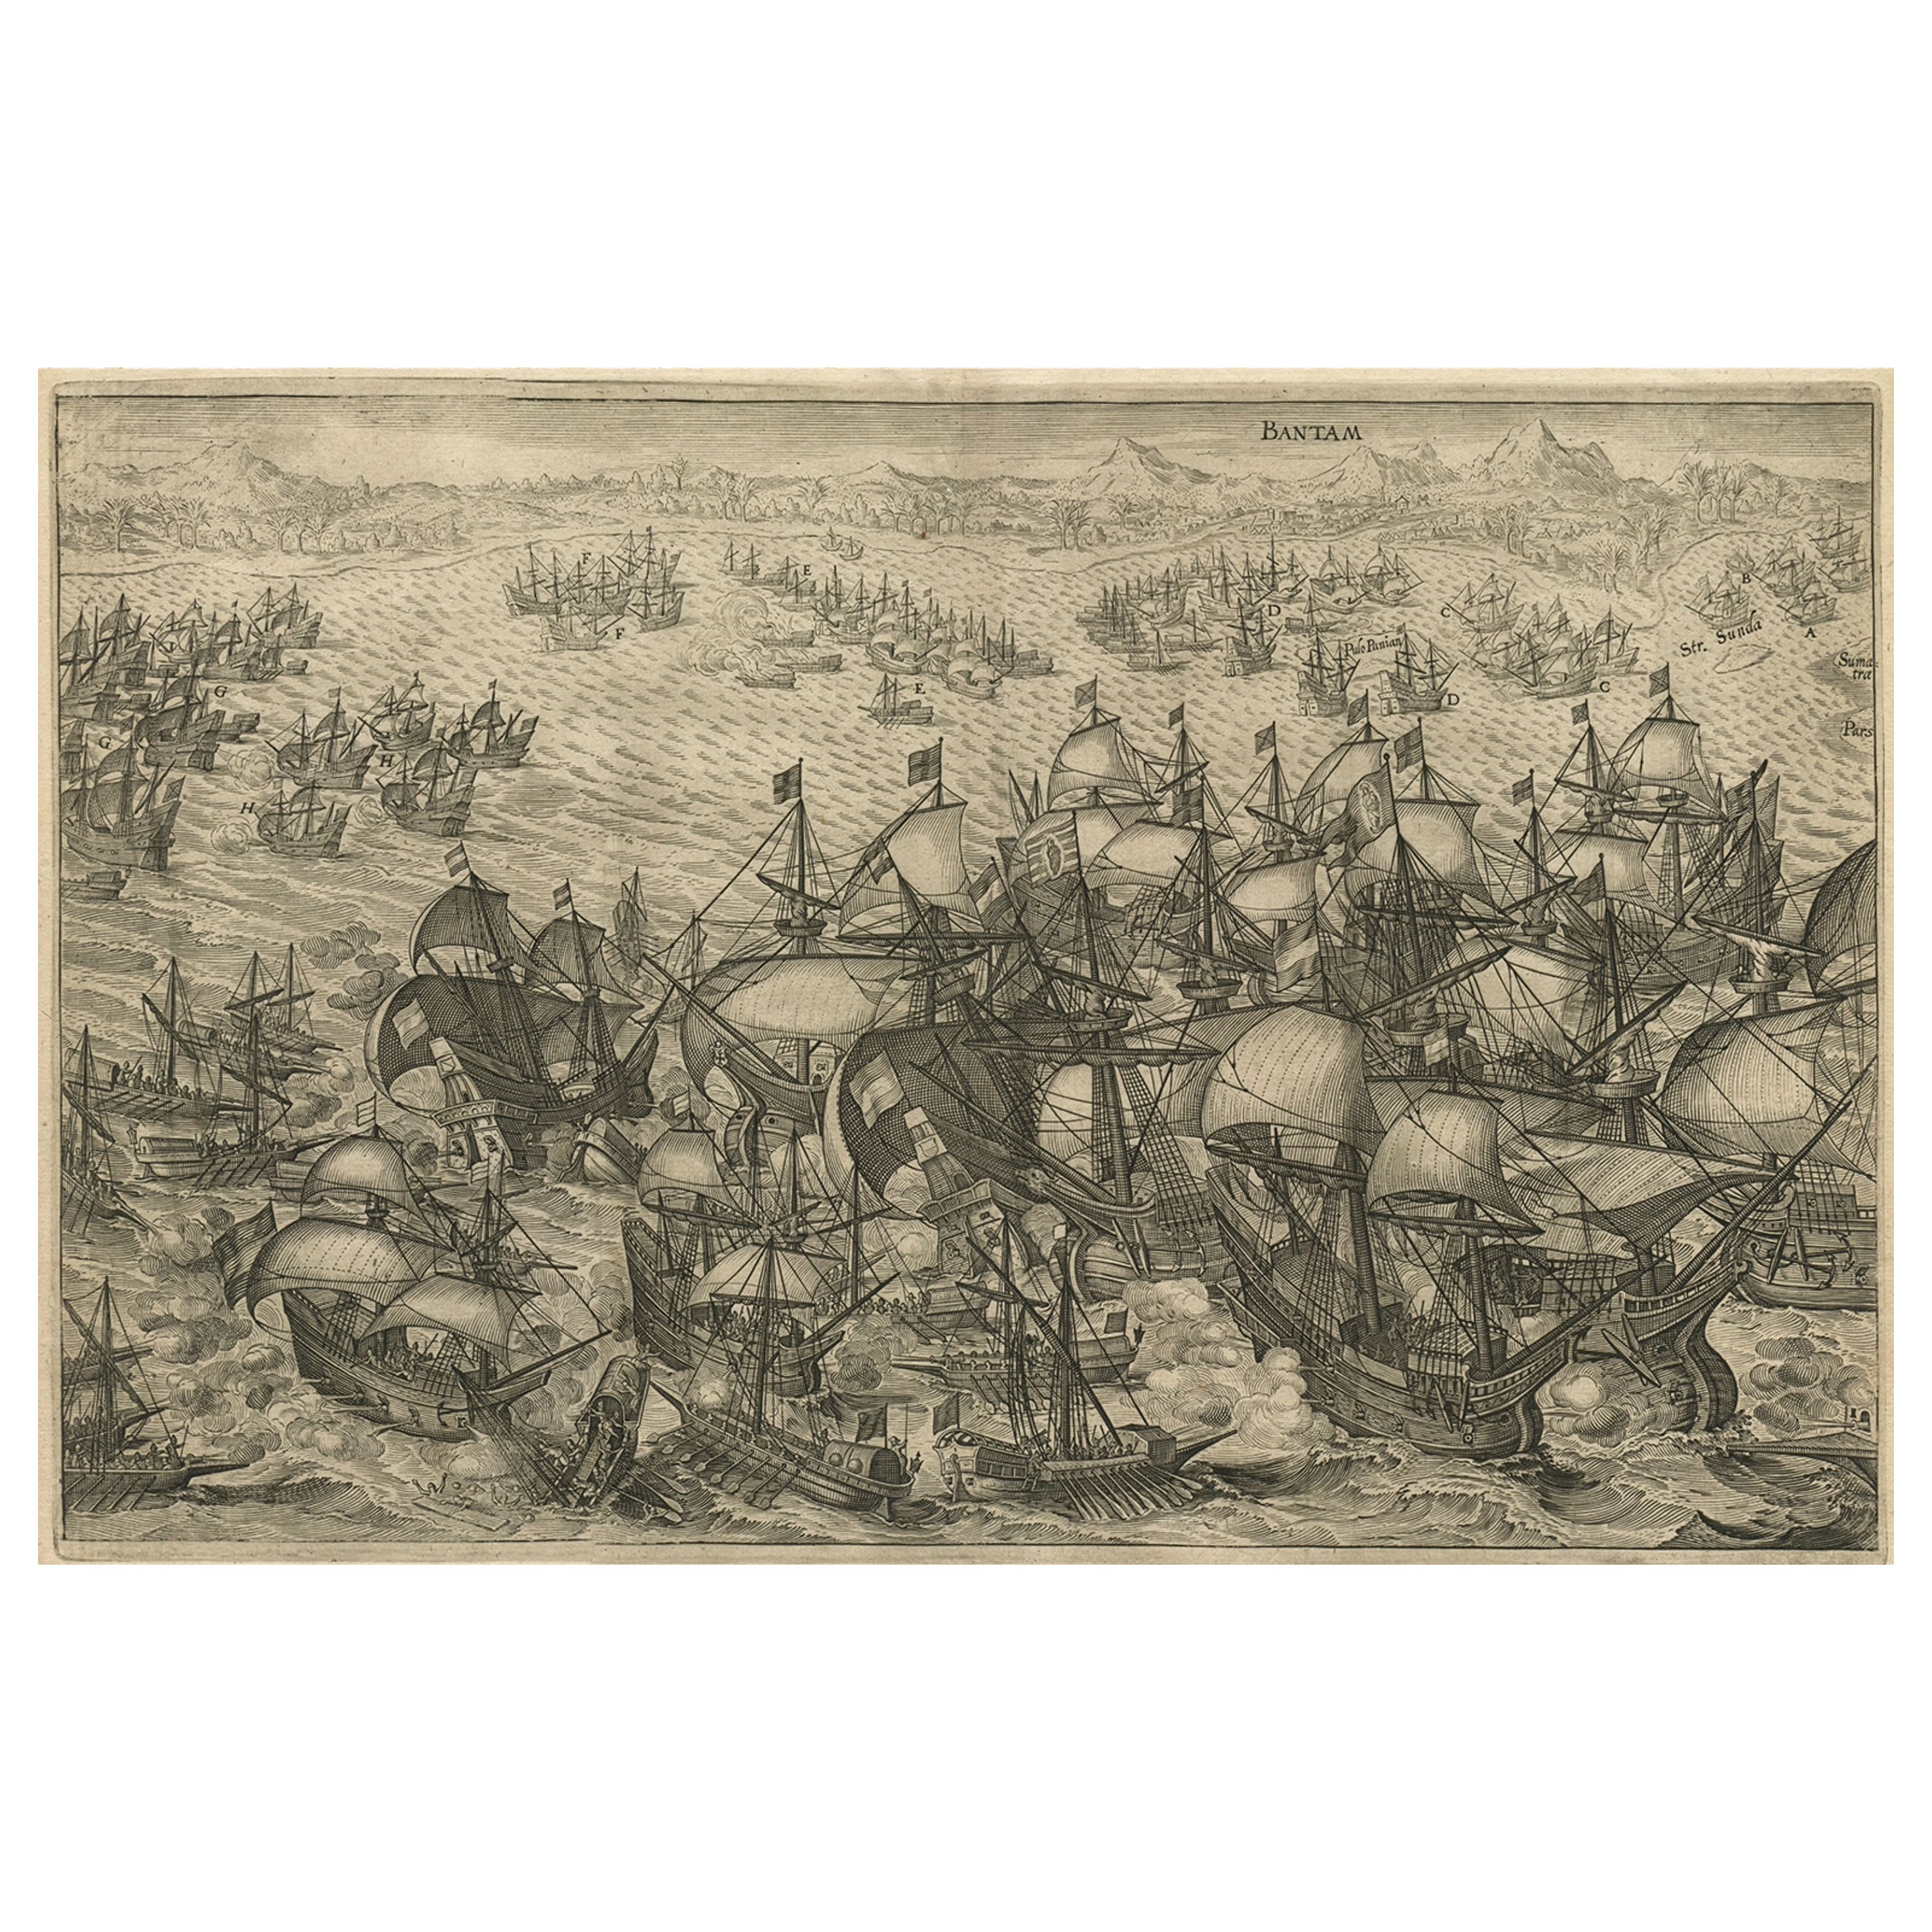 Engraving of Dutch Attacking the Portuguese Fleet off Bantam, Indonesia, 1644